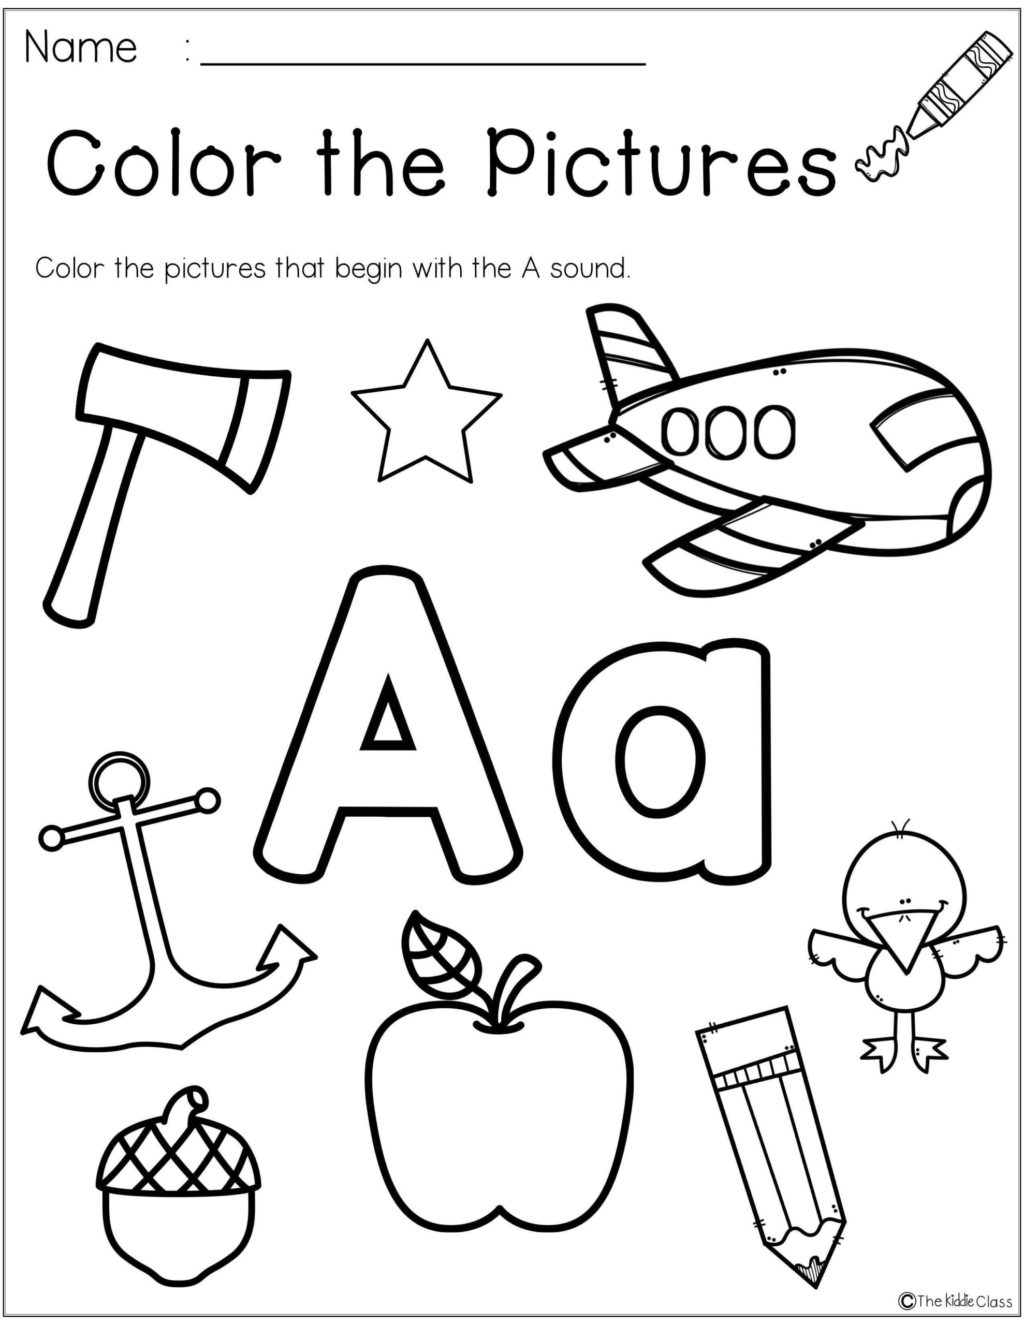 Worksheet ~ Letter Worksheets Fun Activities Pictures intended for Alphabet Worksheets For Nursery Class